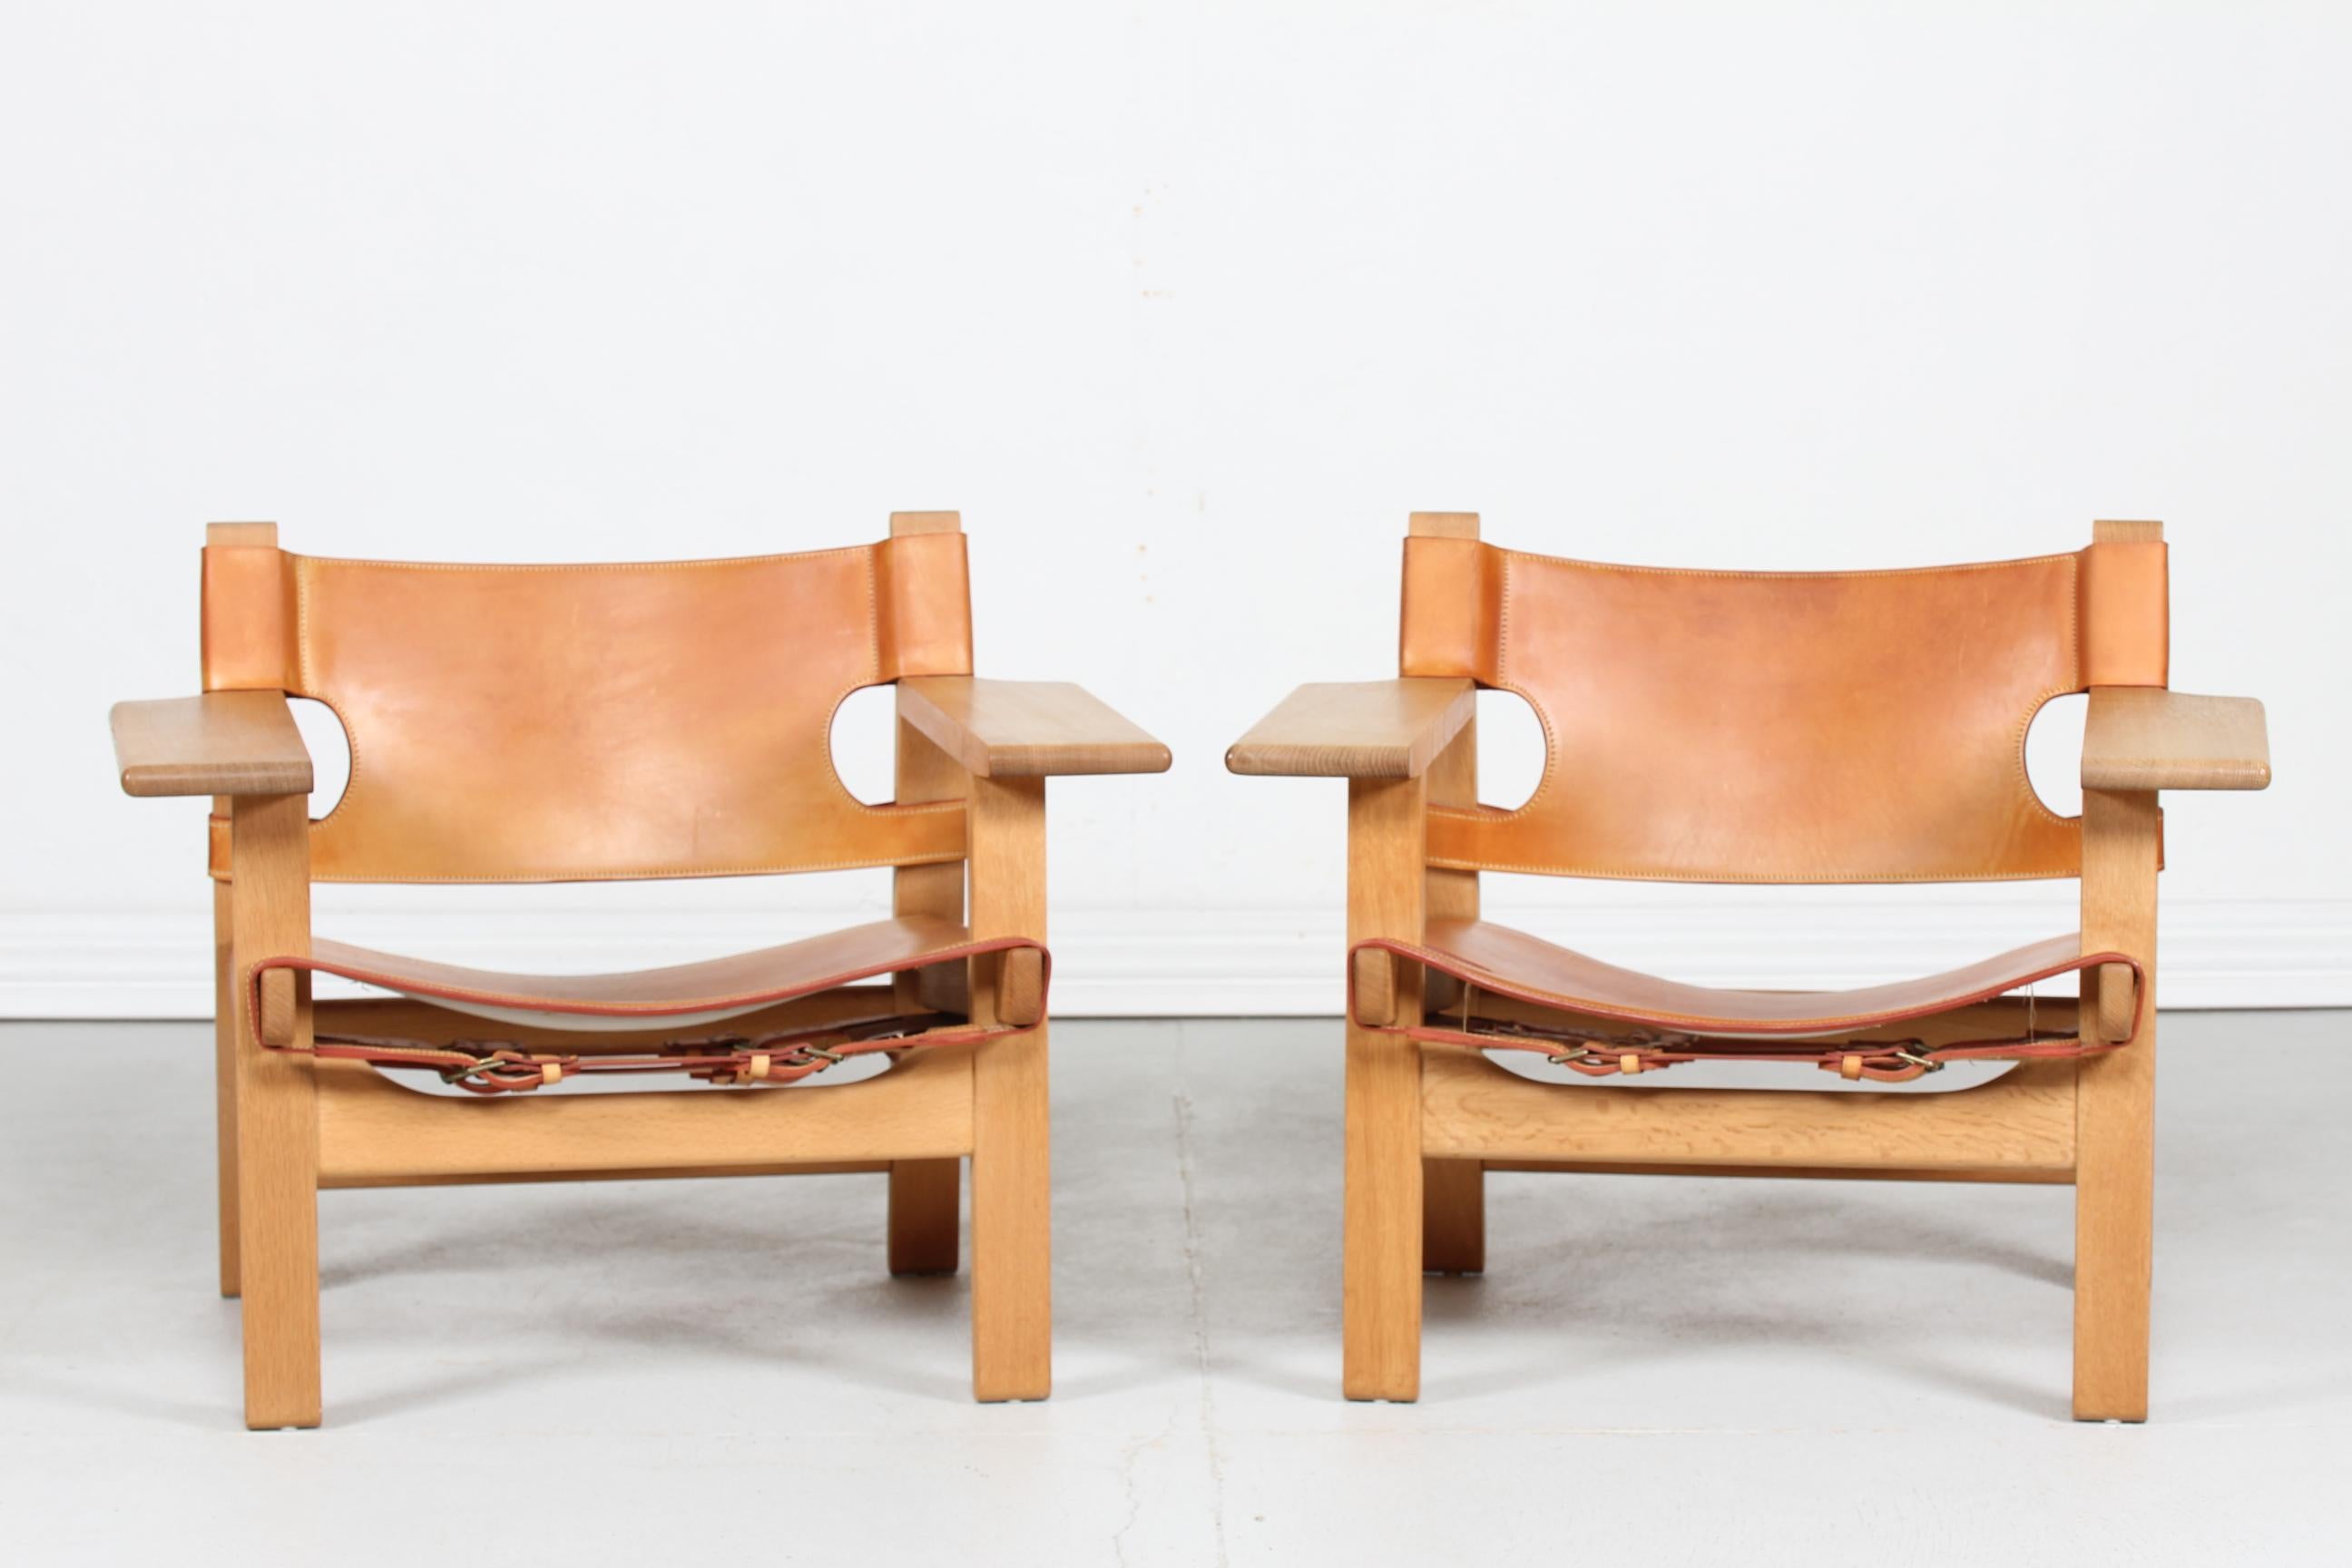 Pair of the Spanish chairs model BM 2226 by Danish designer Børge Mogensen.
They are made of genuine oak with good patina. The chairs have seats and backs of strong thick quality leather in cognac color with beautiful patina.

Paper label under